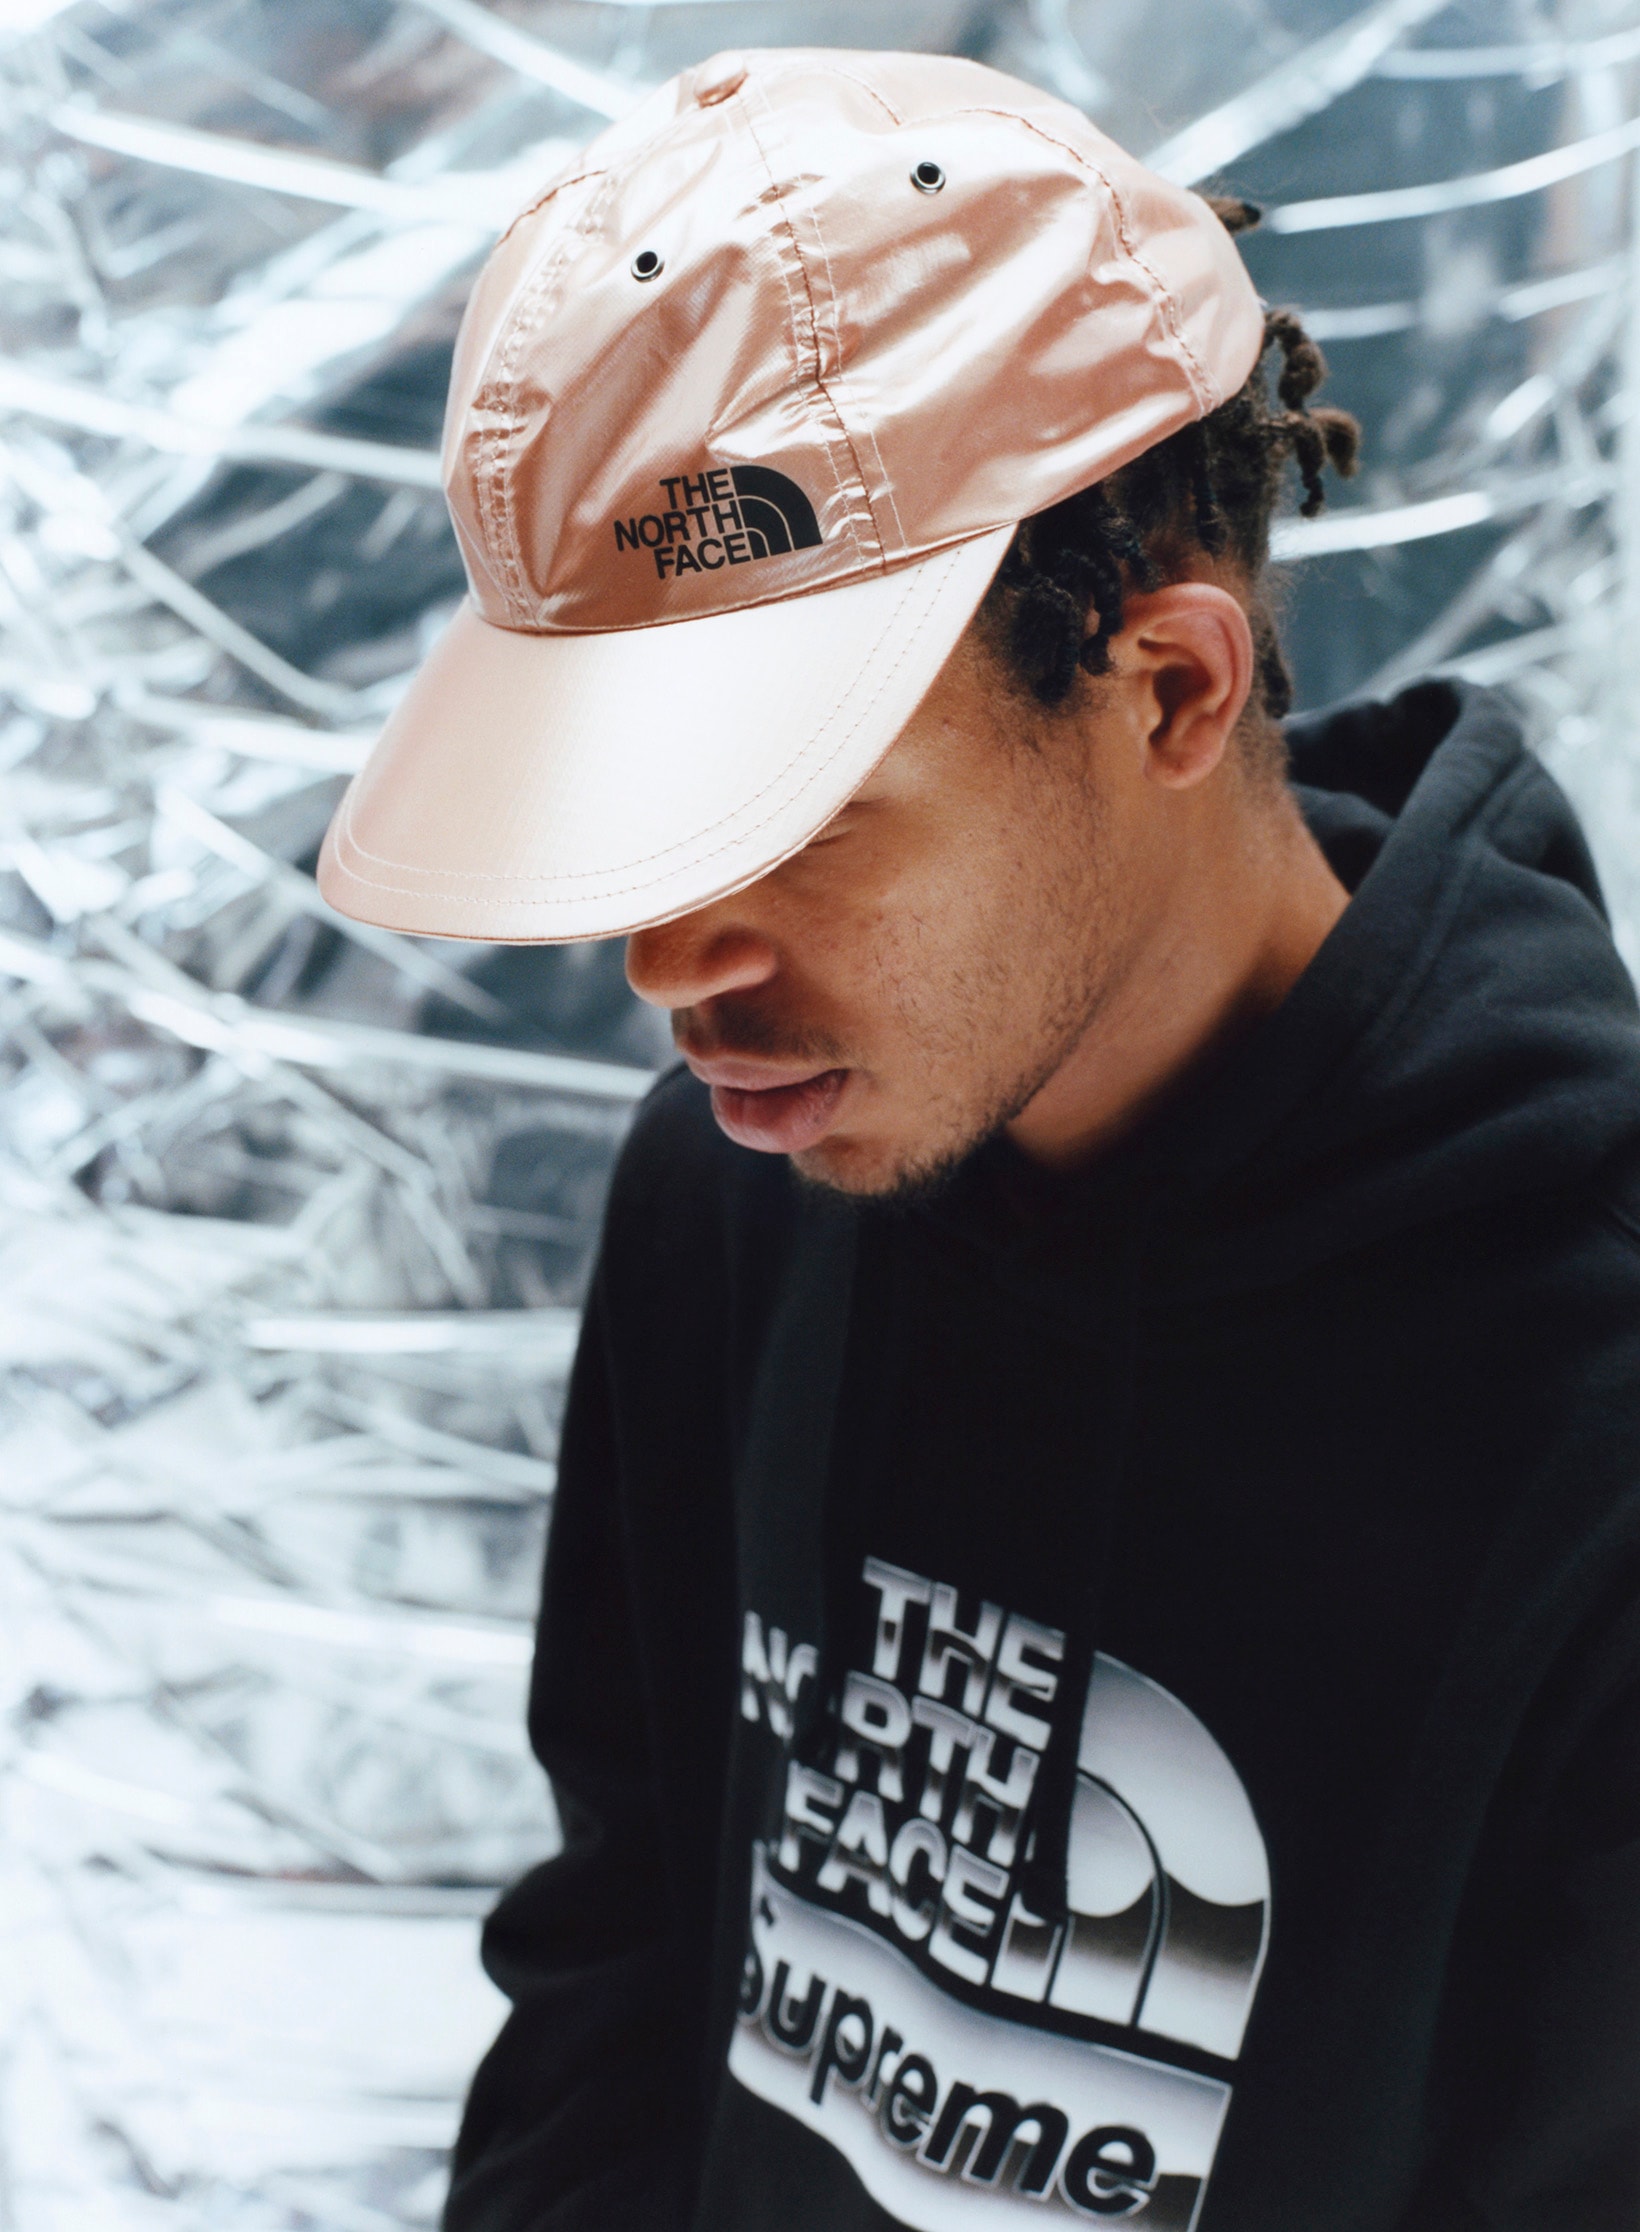 Supreme x The North Face Metallic Collection